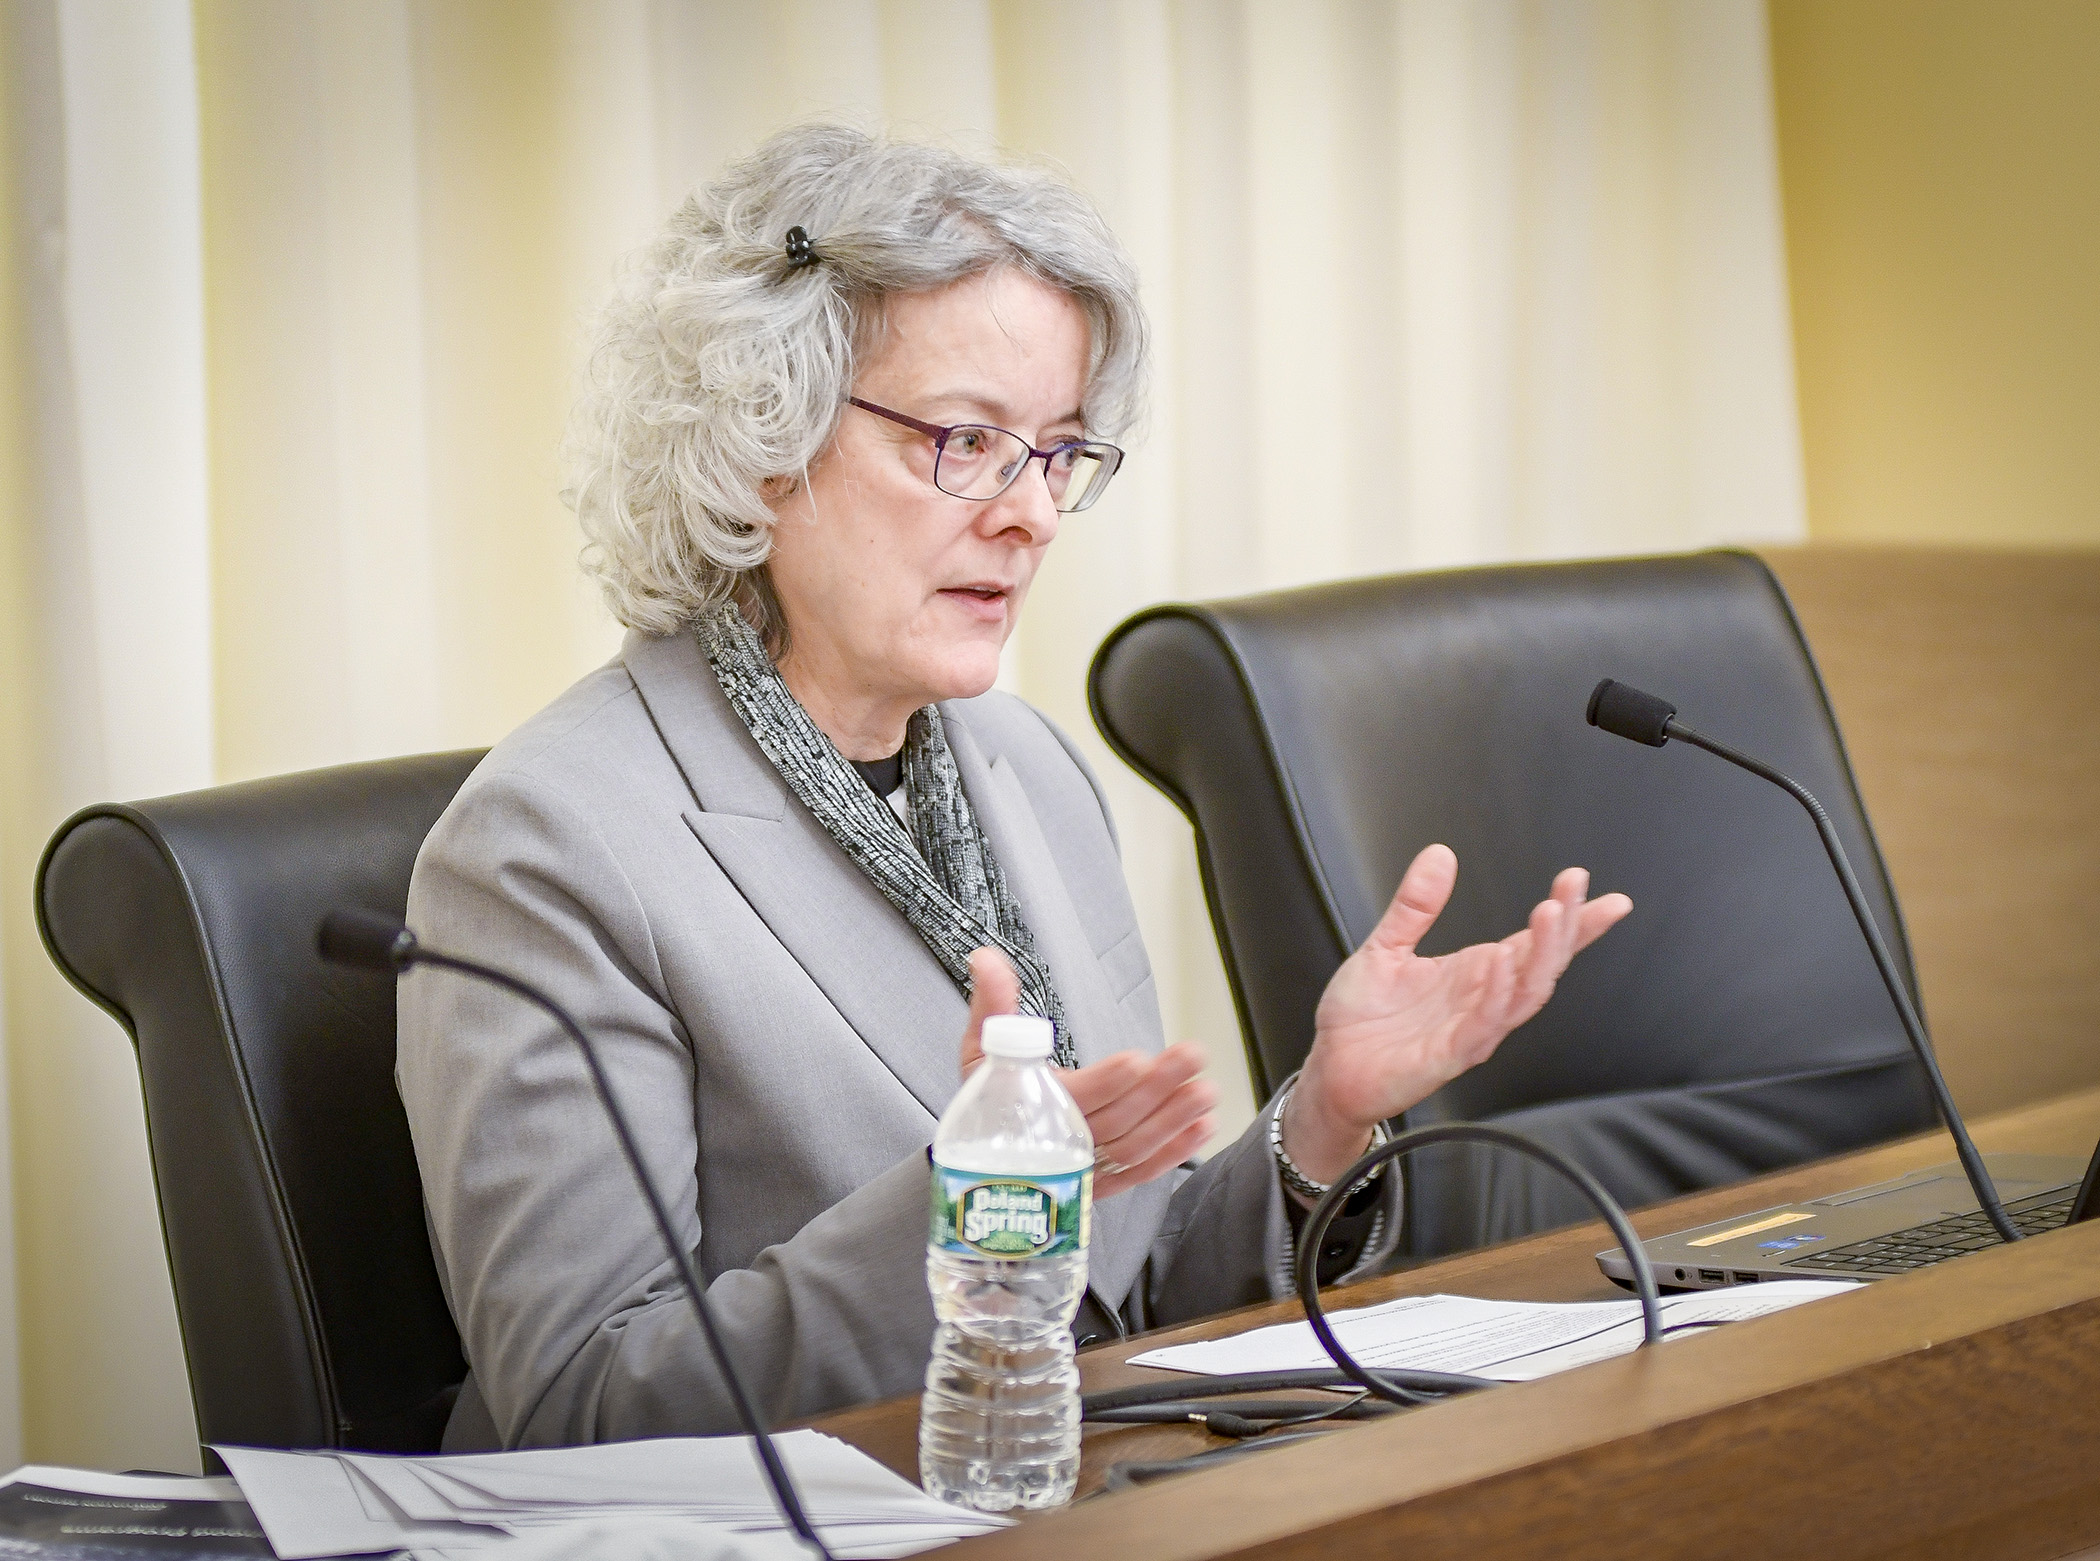 Jody Hauer, evaluation coordinator for the Office of the Legislative Auditor, presents the 2018 evaluation report on early childhood programs to the House Early Childhood Finance and Policy Division Feb. 7. Photo by Andrew VonBank